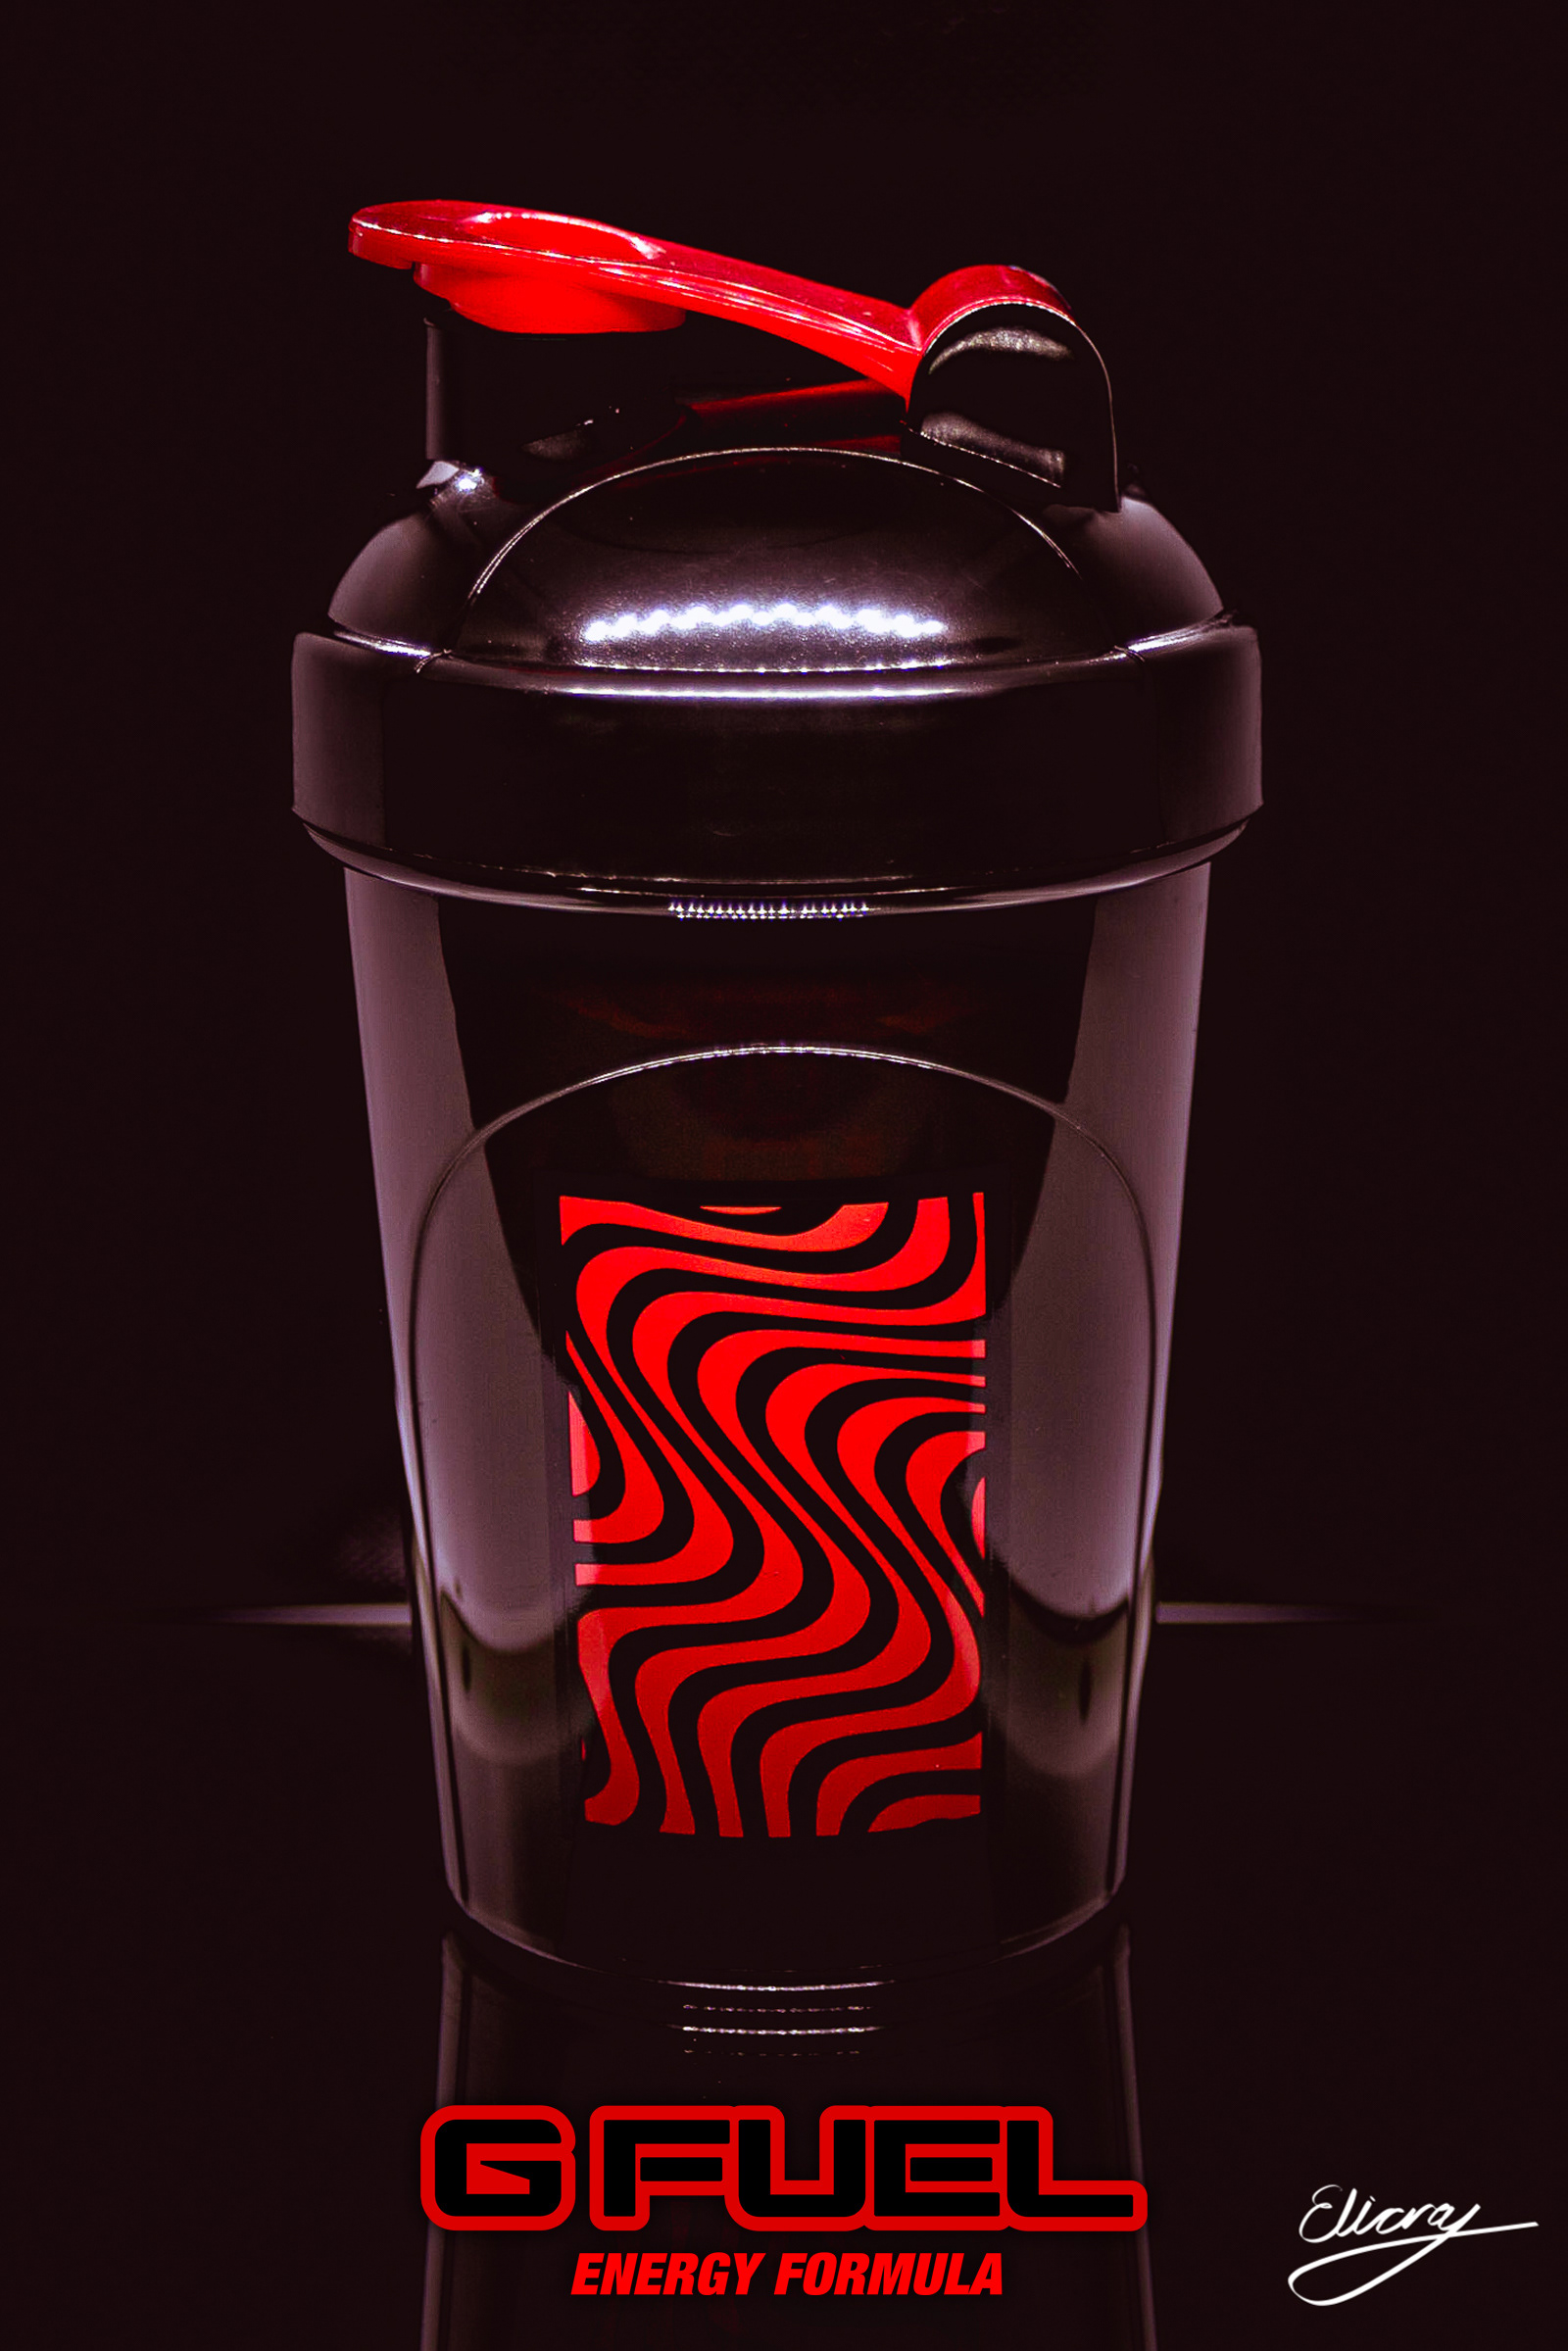 GFuel Shaker Advertisement by Armsy on Dribbble